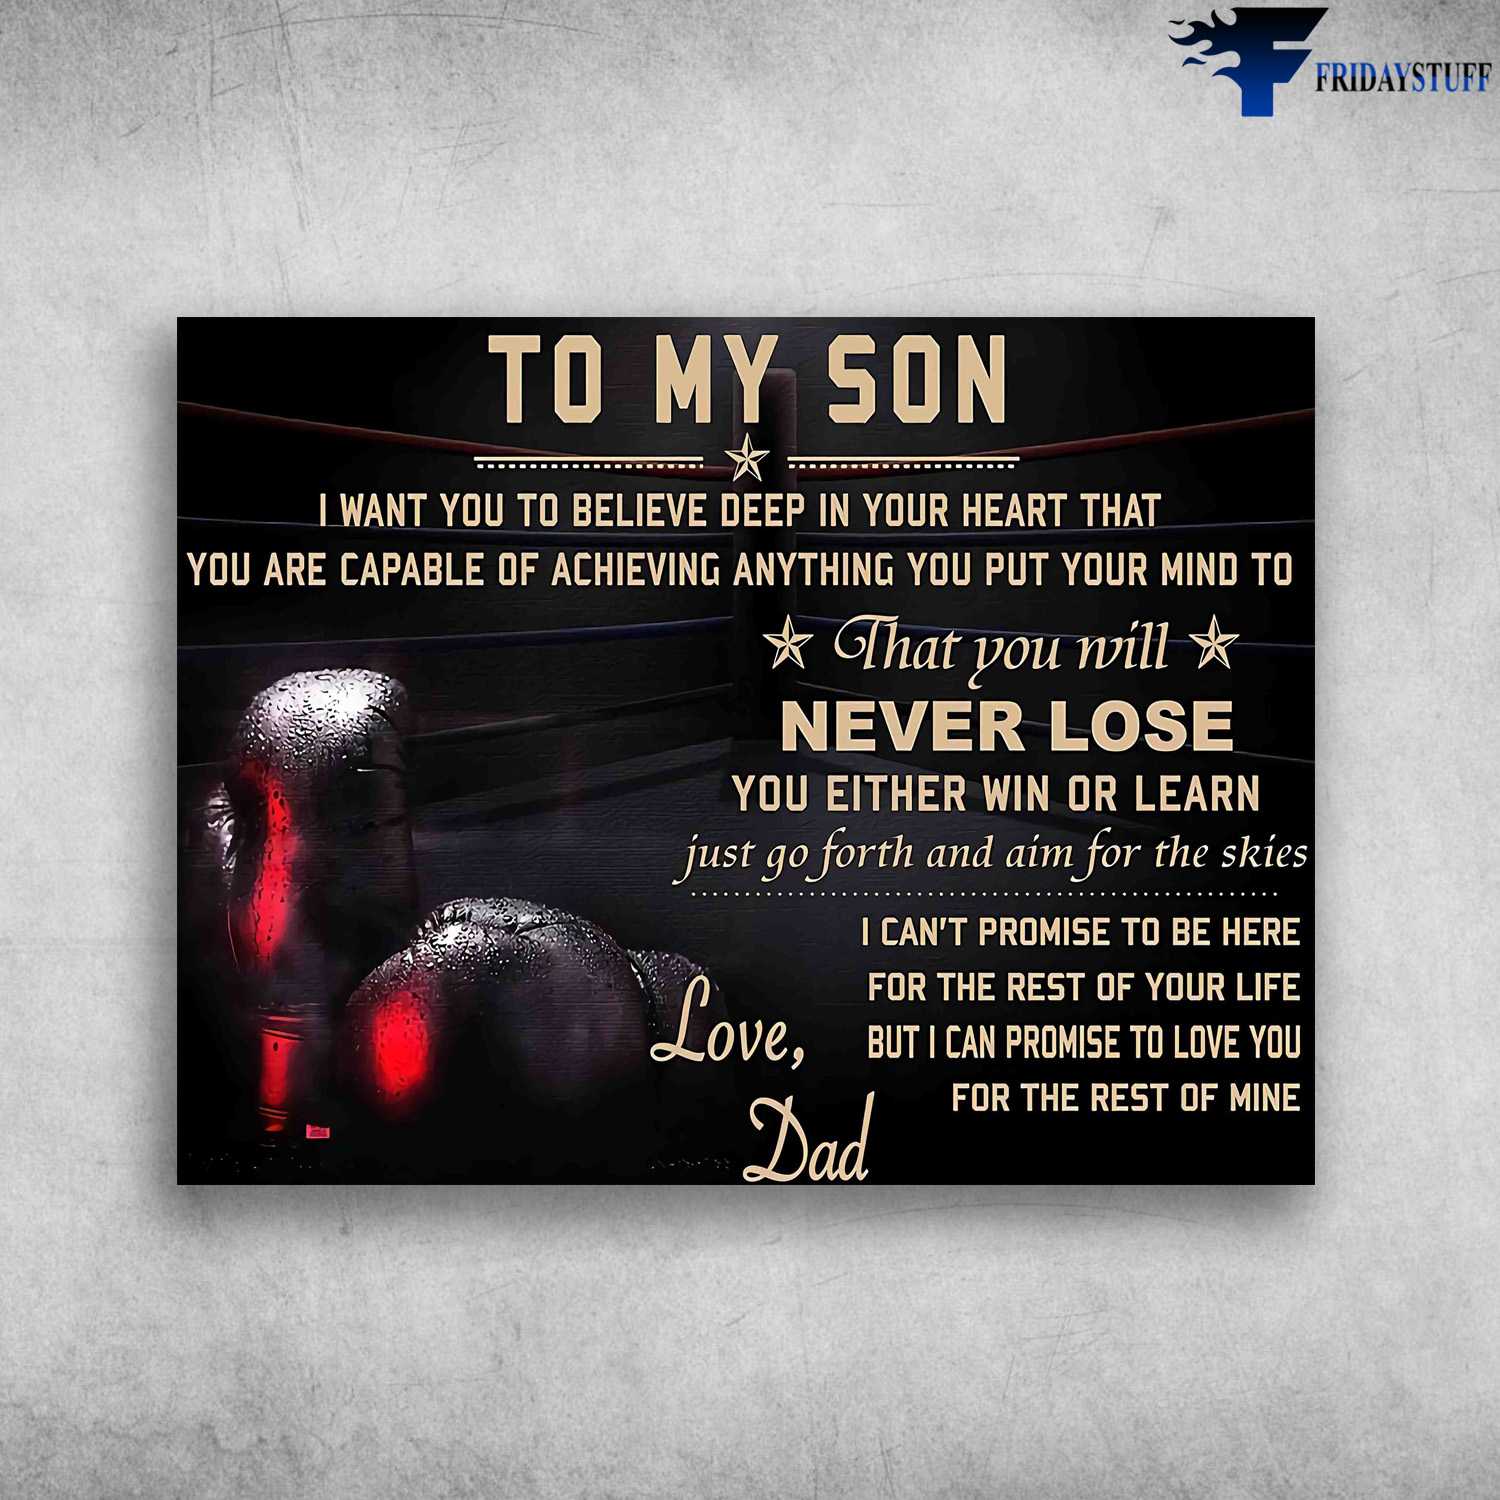 Boxing Poster, Dad And Son Boxing - To My Son, I Want You To Believe Deep In Your Heart That, You Are Capable Of Achieving Anything, You Put Your Mind To, That You Will Never Lose